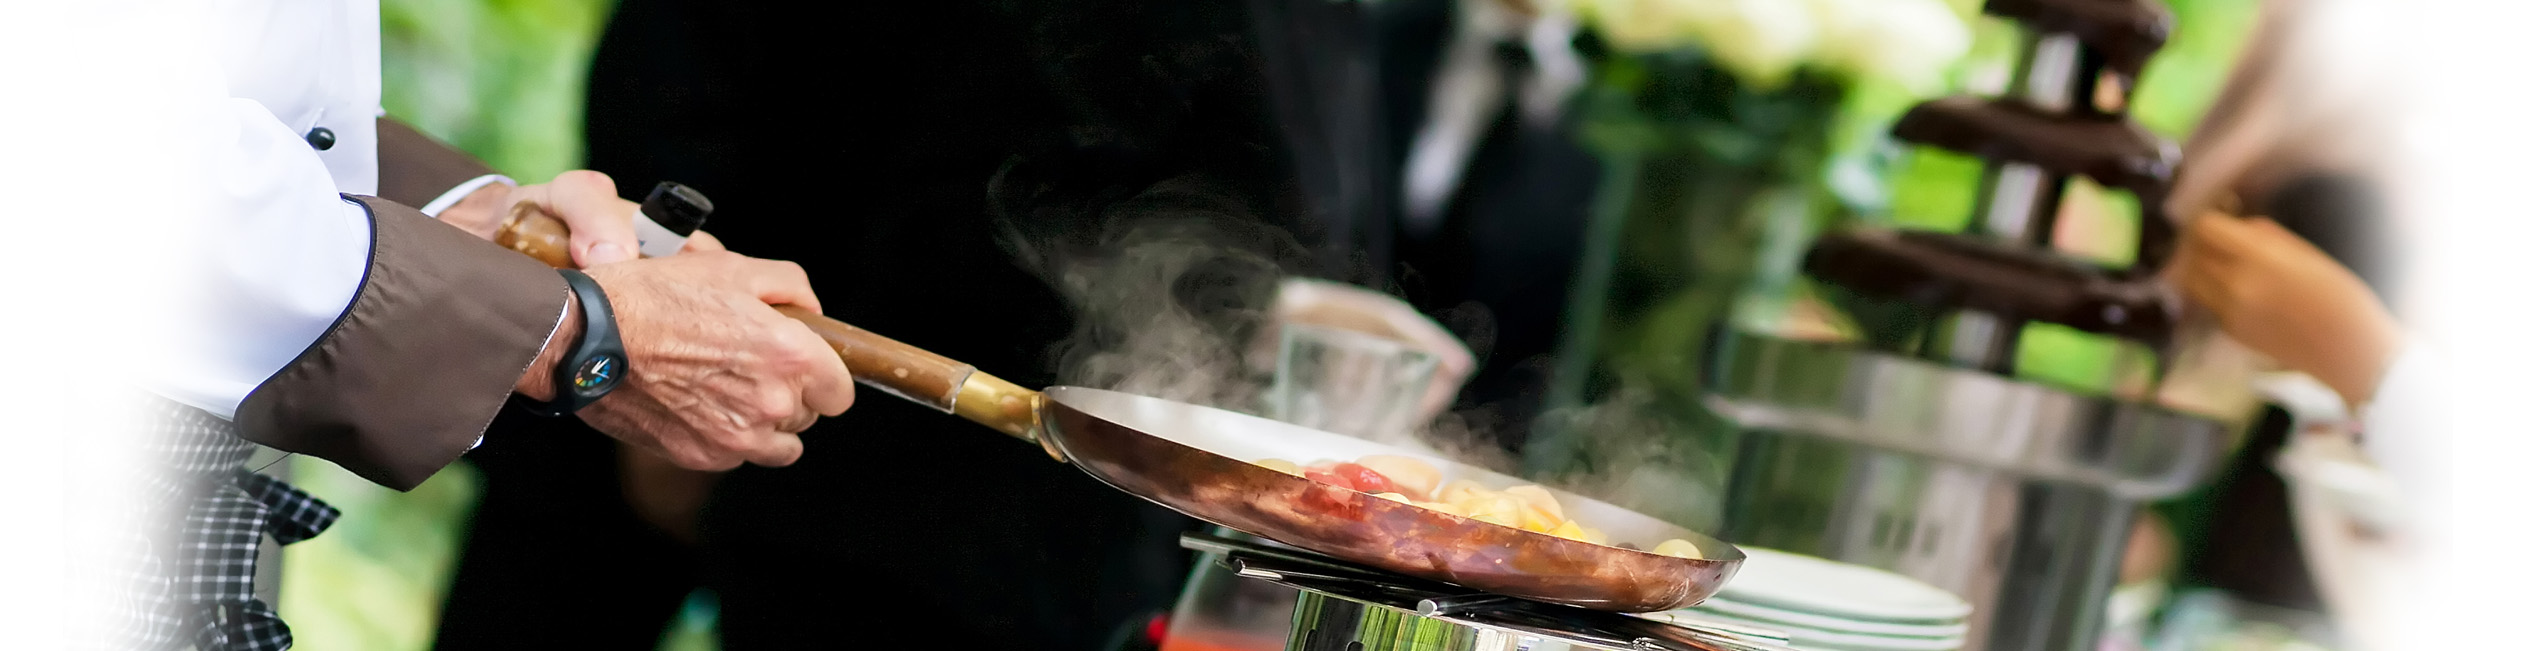 Protect your catering business with comprehensive liability, van and business insurance. Catering banner with hot food sizzling in a frying pan.